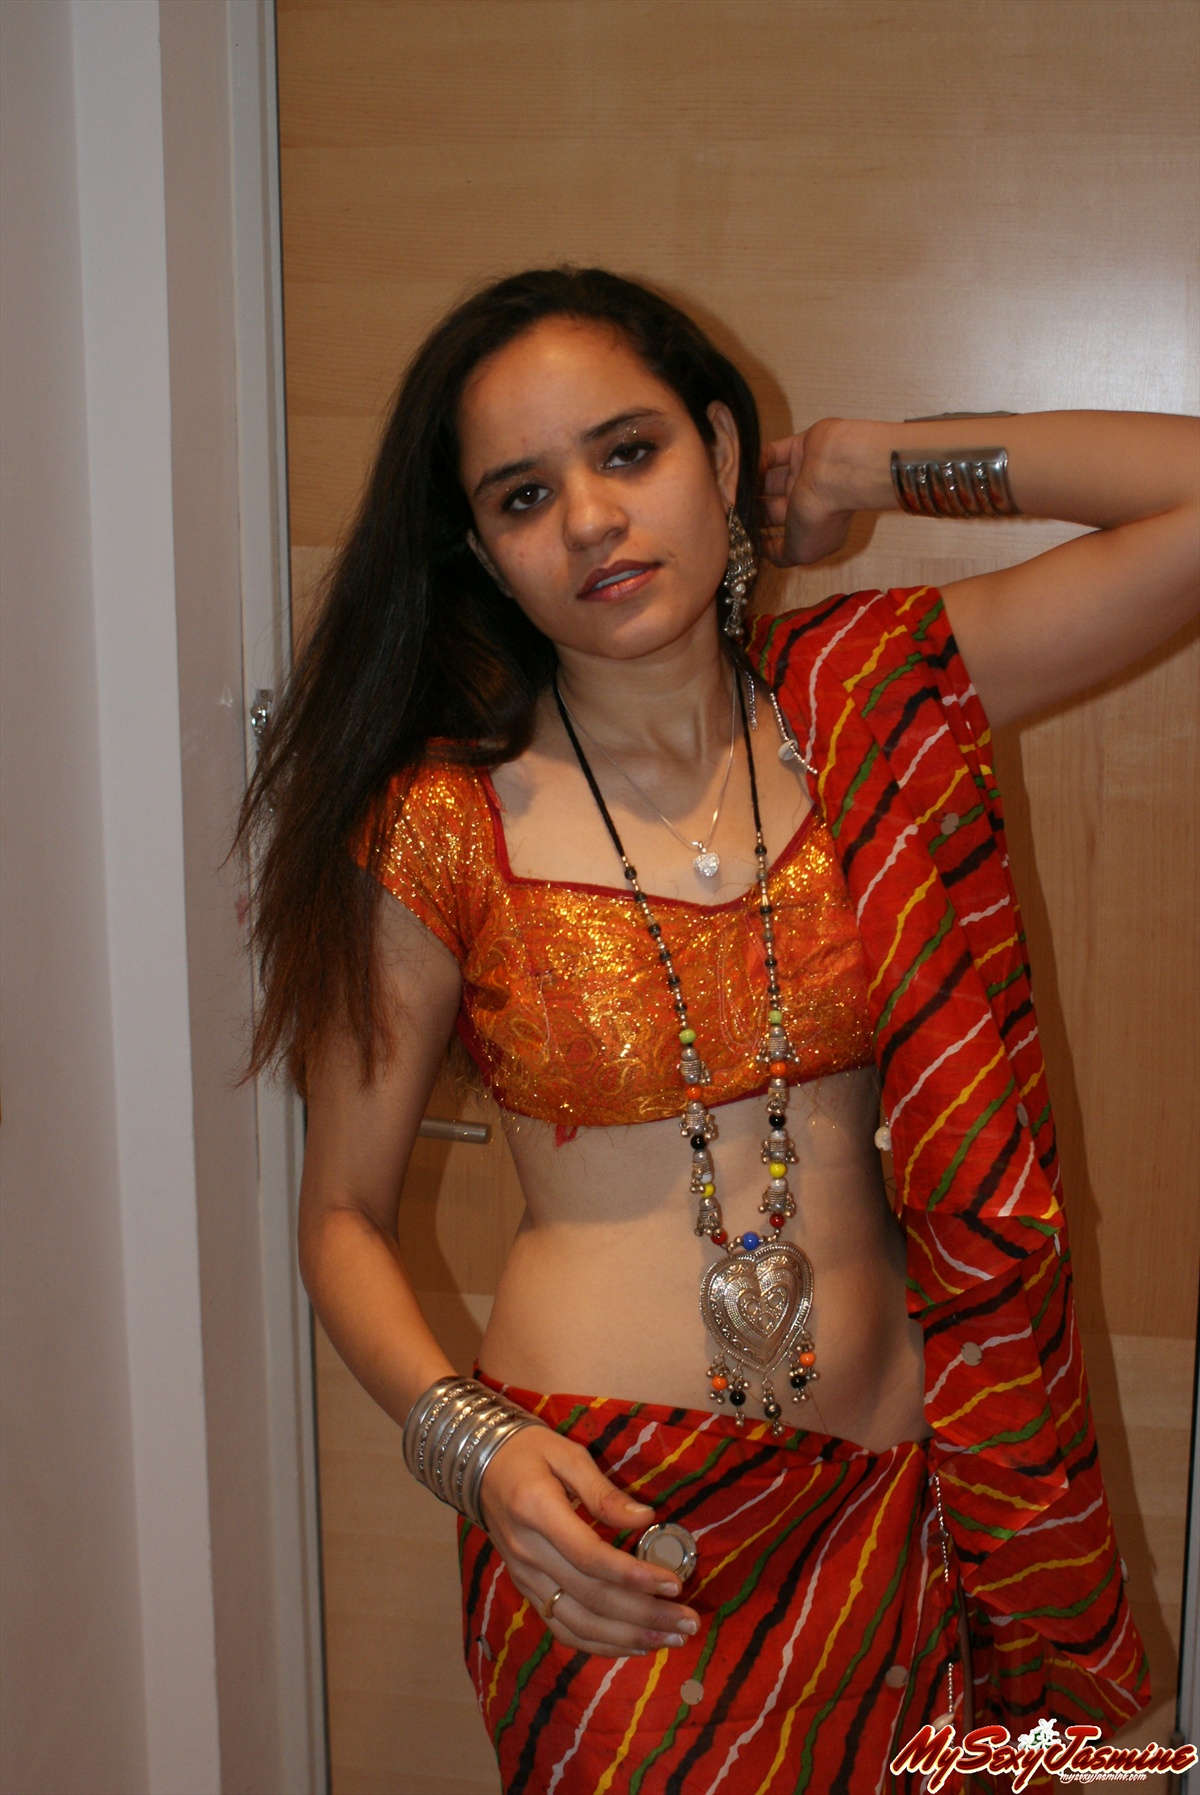 Iab picture gallery 12. Jasime in traditional Indian ghagra